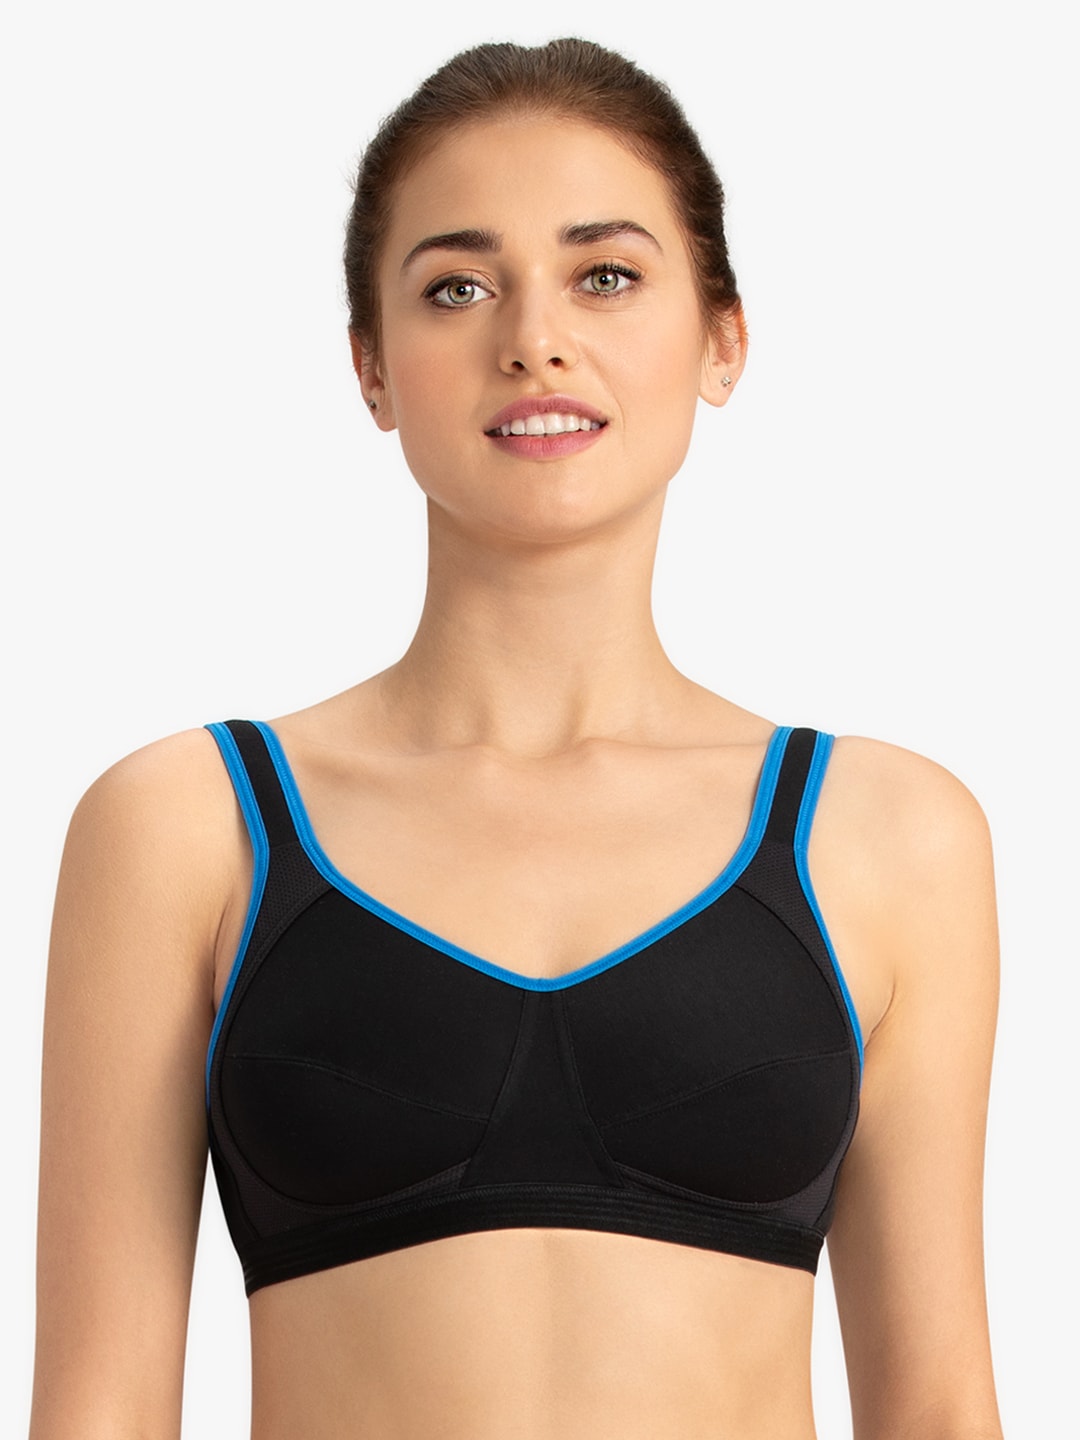 Amante Woman Black Solid Non-Wired Lightly Padded Sports Bra -ABR18103 Price in India